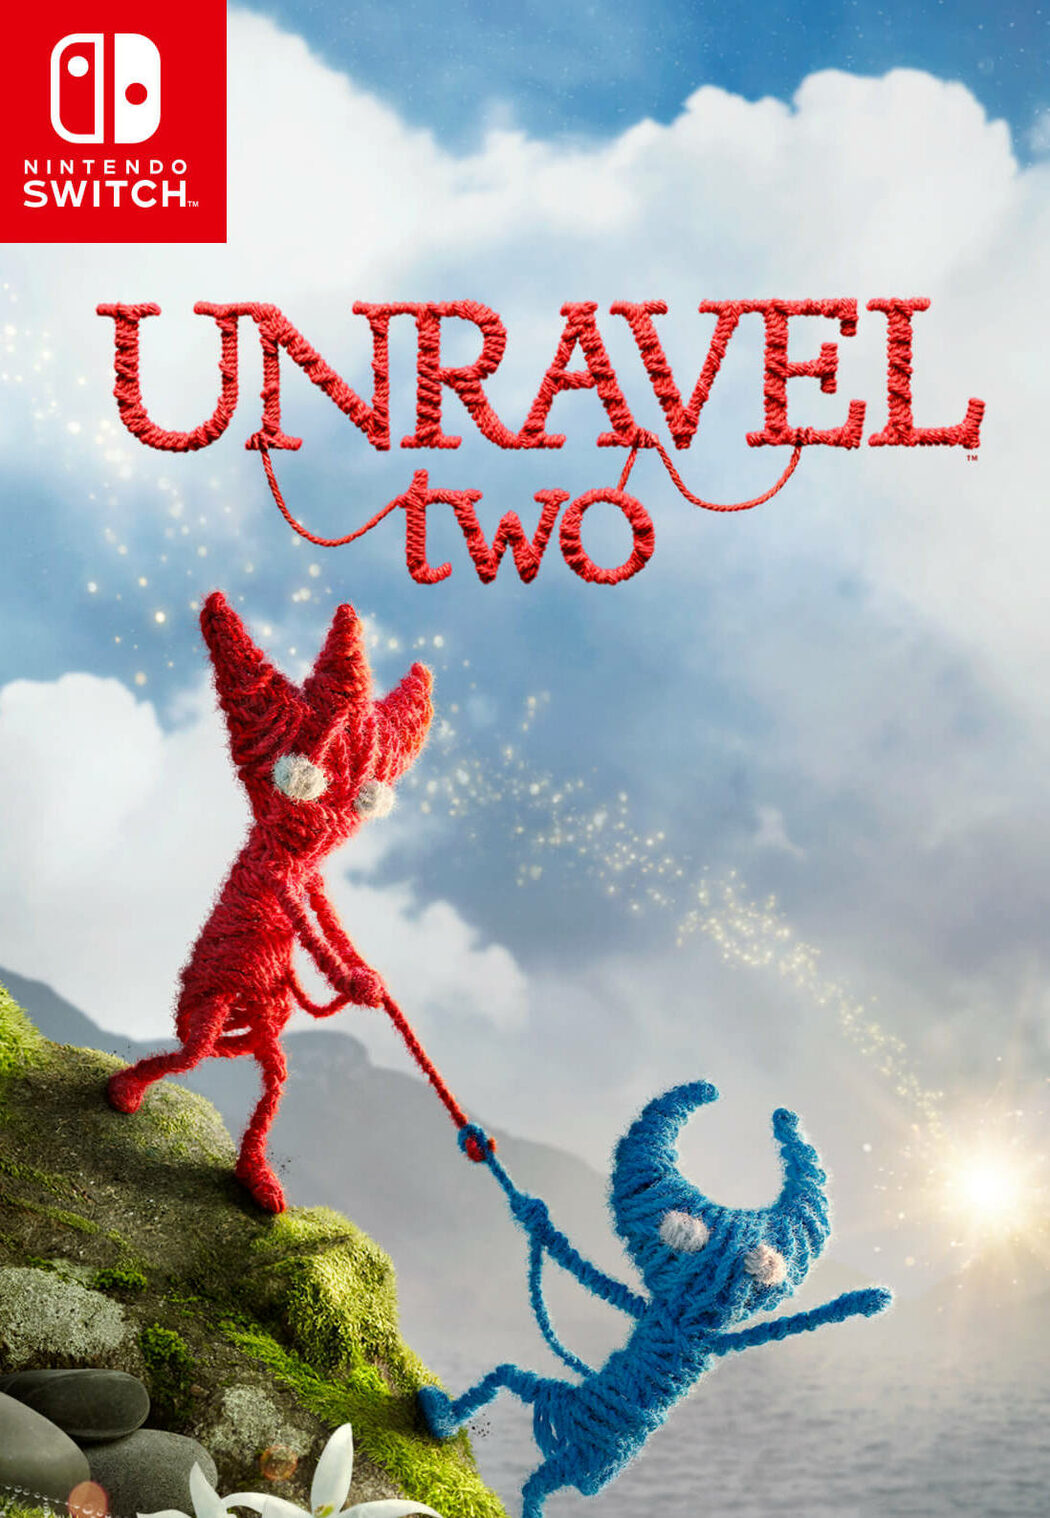 Buy Unravel the Switch ENEBA Nintendo Best for Price! Key Two | at